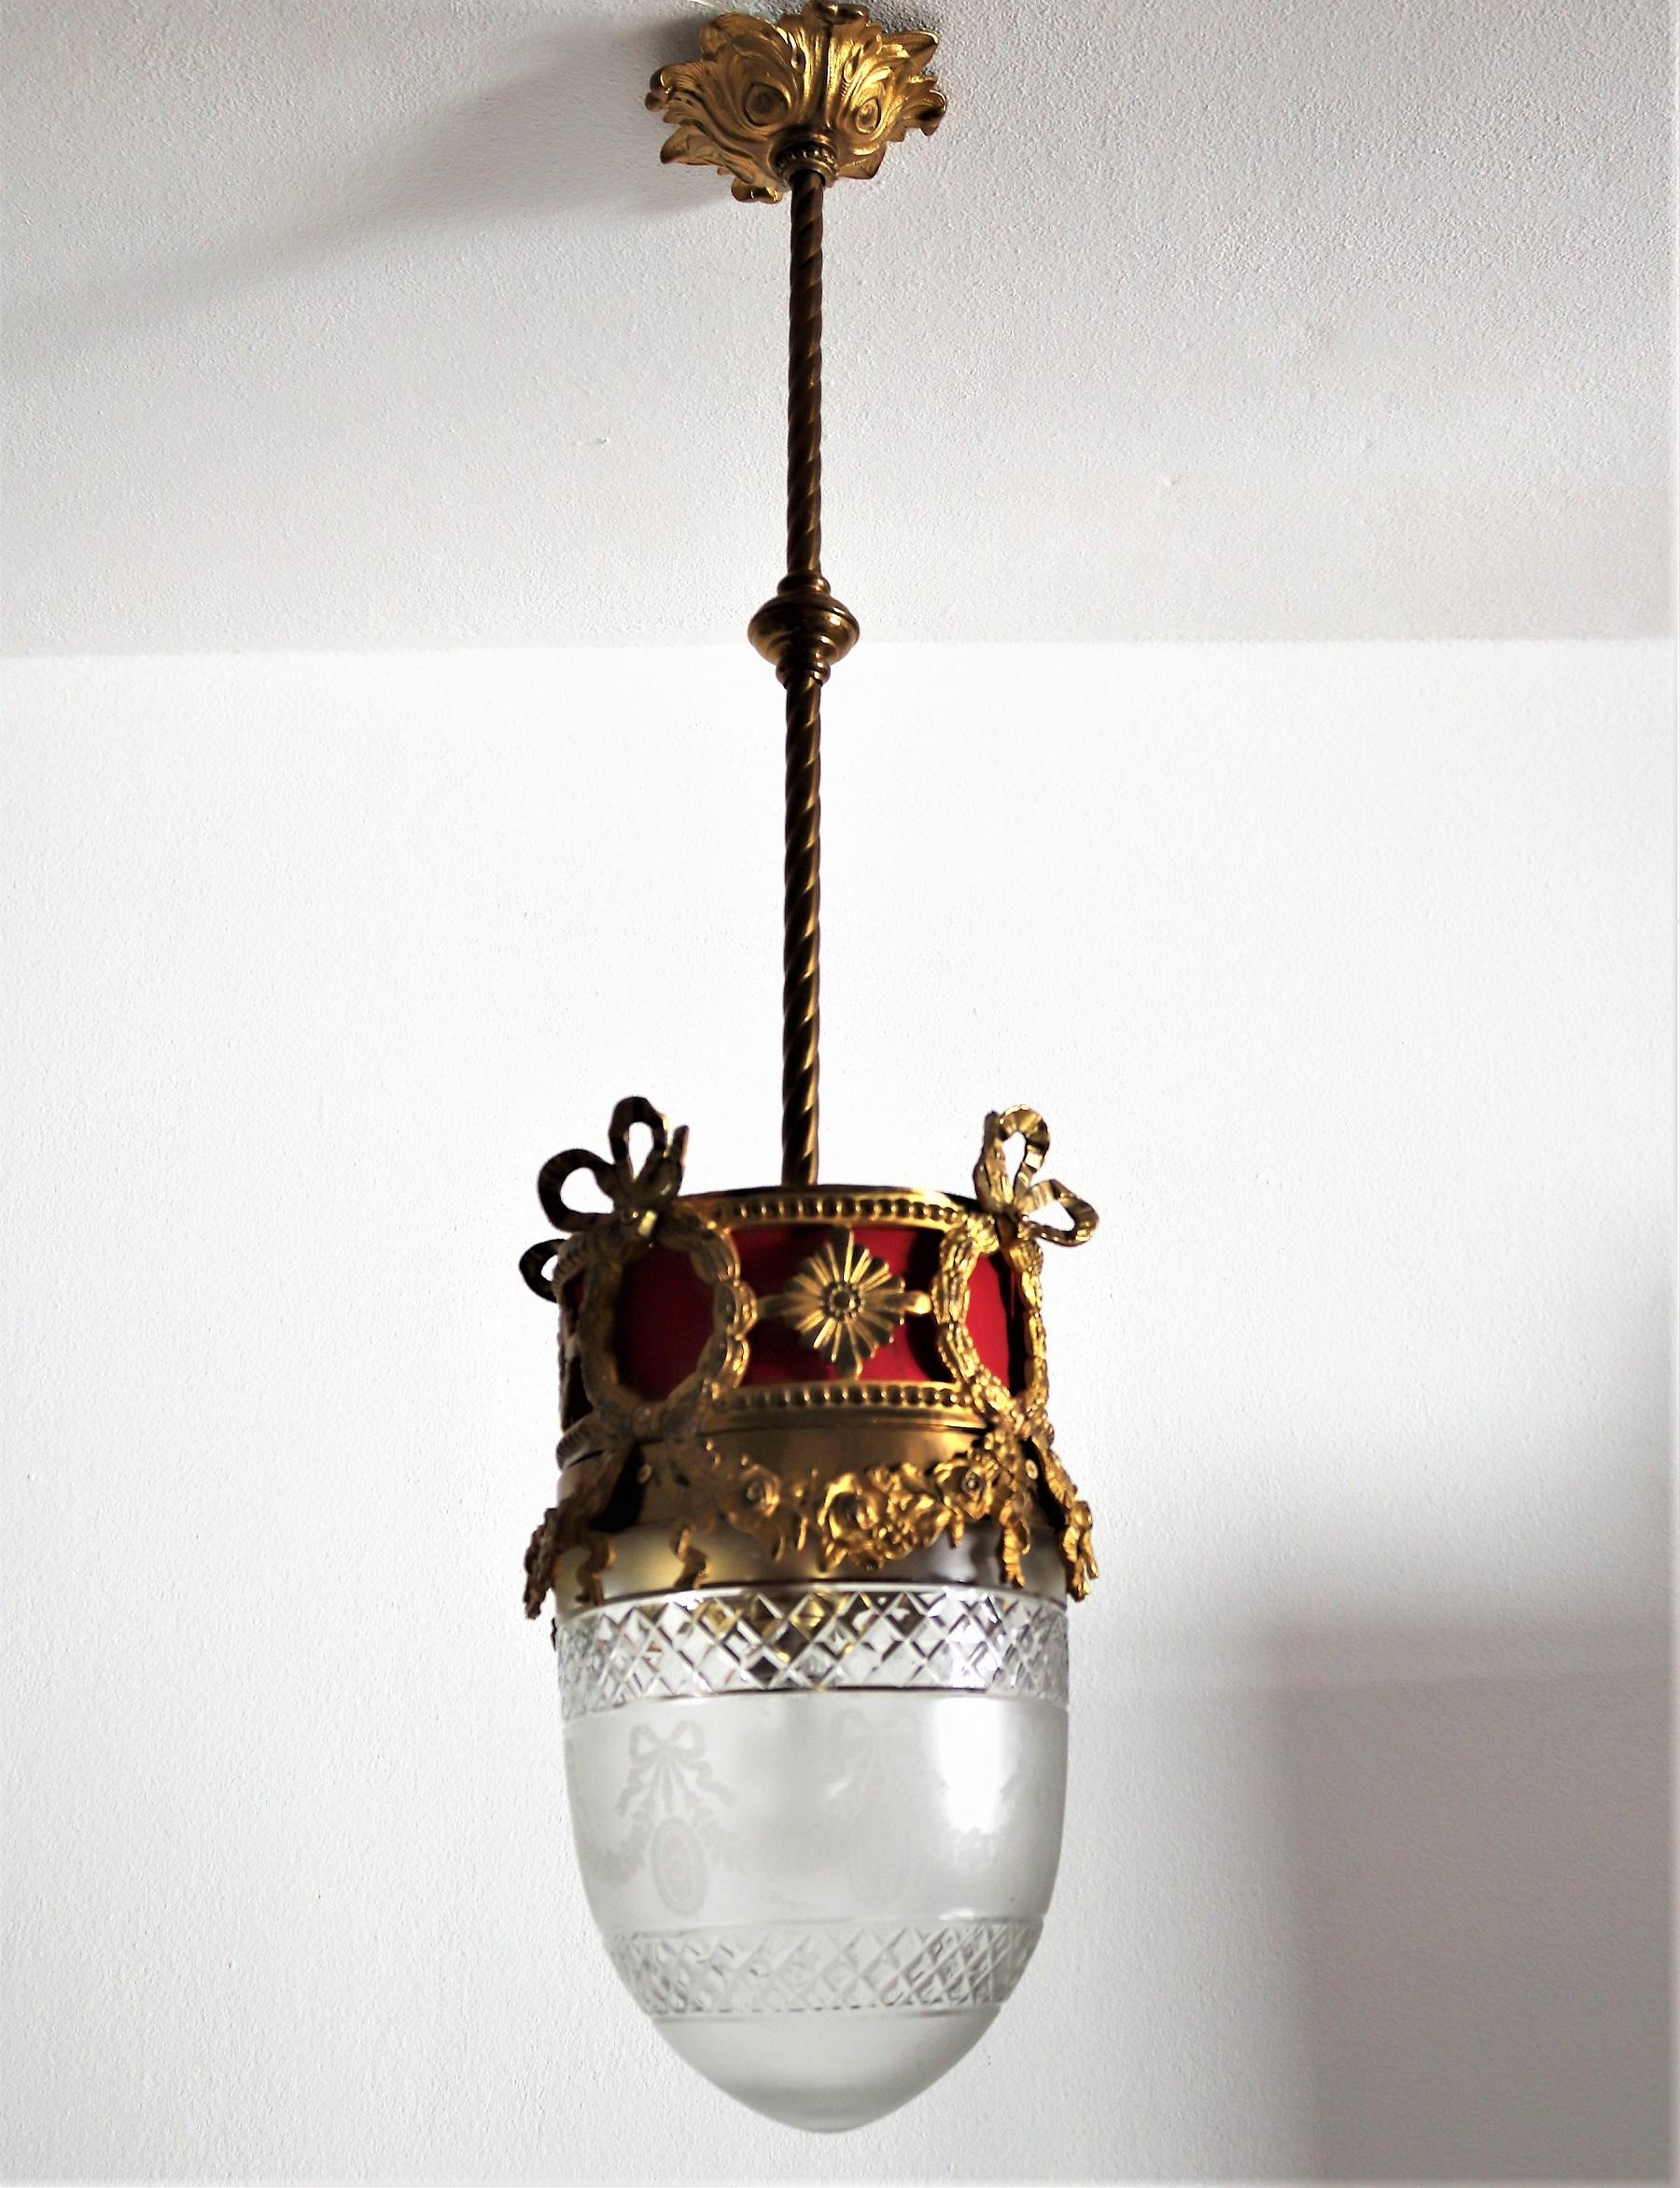 Gorgeous antique lantern made of heavy bronze and beautiful crystal cut glass with red textile inlet,
Made in the 1950s, Italy.
Bronze canopy and bar to the ceiling.
The lamp is in original shape and in very good vintage and working condition.
No